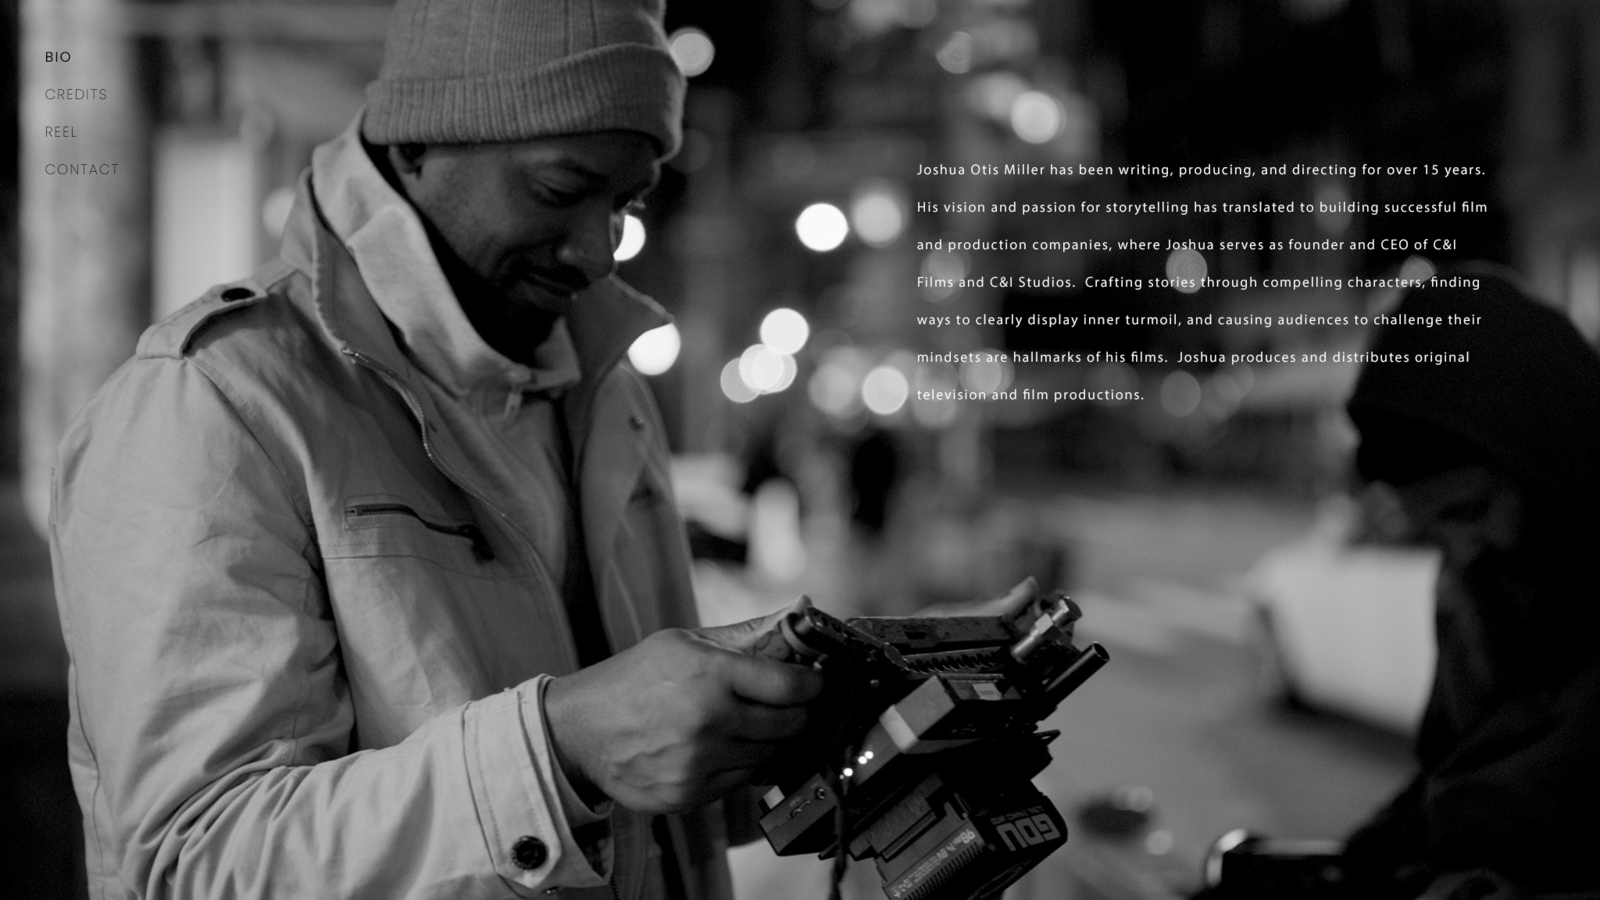 Black and white of Joshua wearing a knit cap and jacket looking at a camera video display smiling with white text